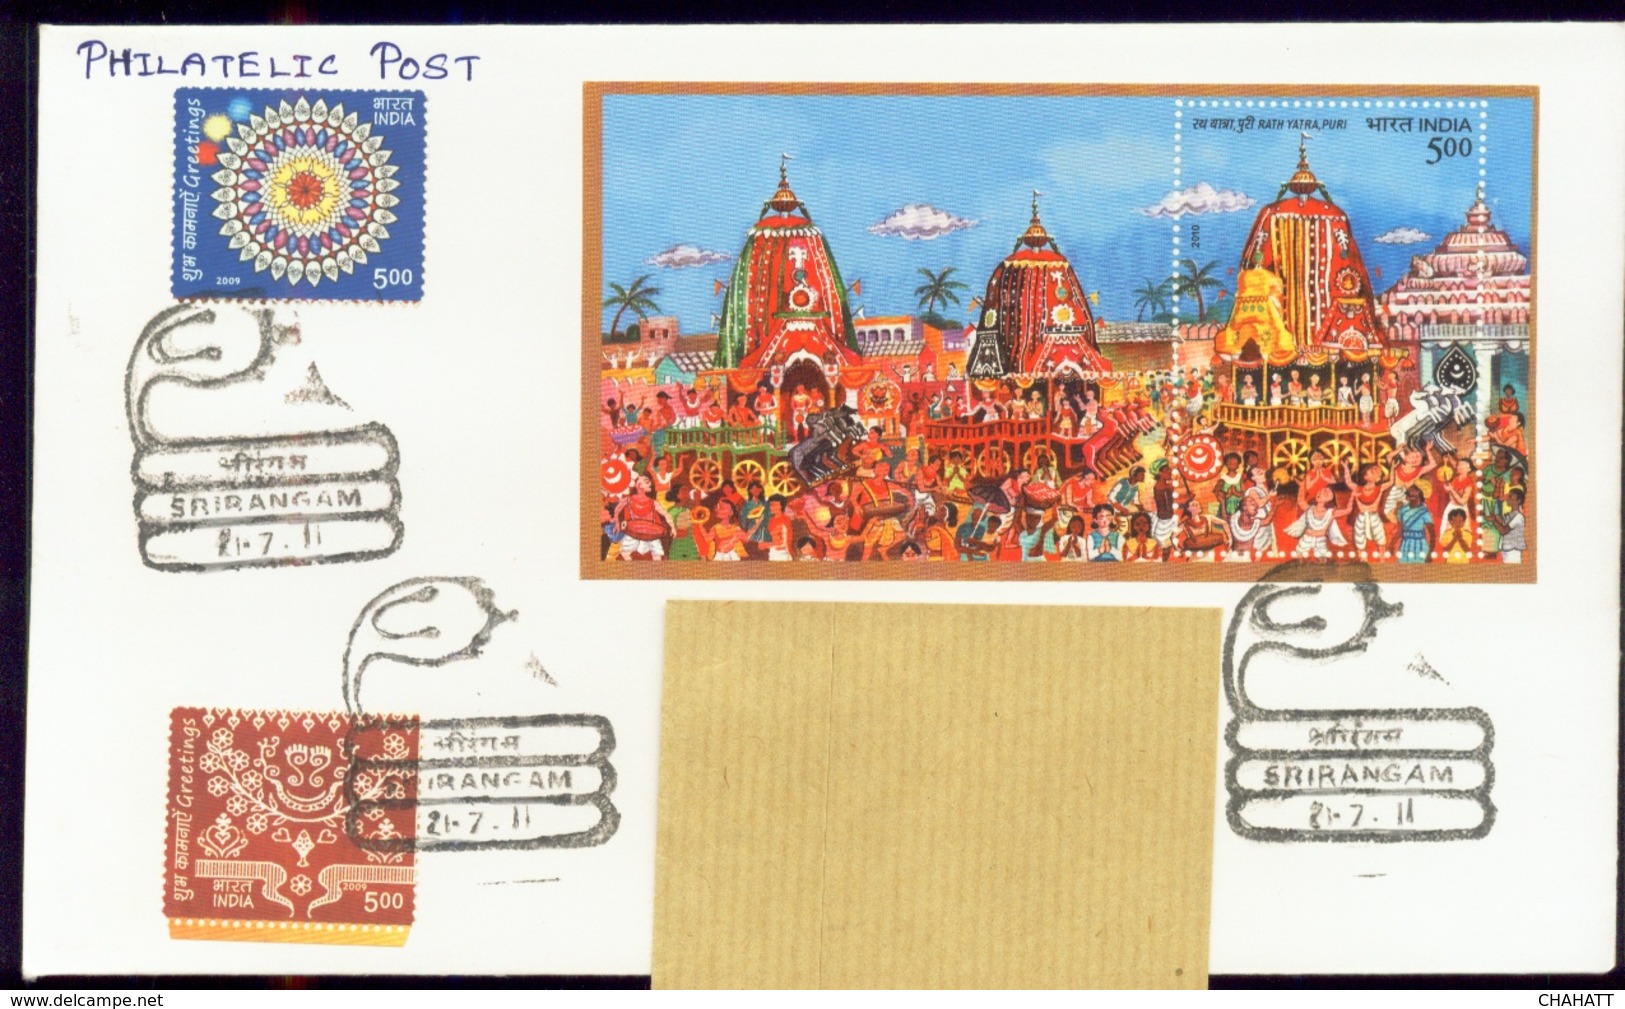 RELIGION-HINDUISM-LORD VISHBU AND HIS SNAKE-RATH YATRA-MS ON COVER-PICTORIAL CANCELLATION-PHILATELIC COVER-2011-IC-233-3 - Hinduism